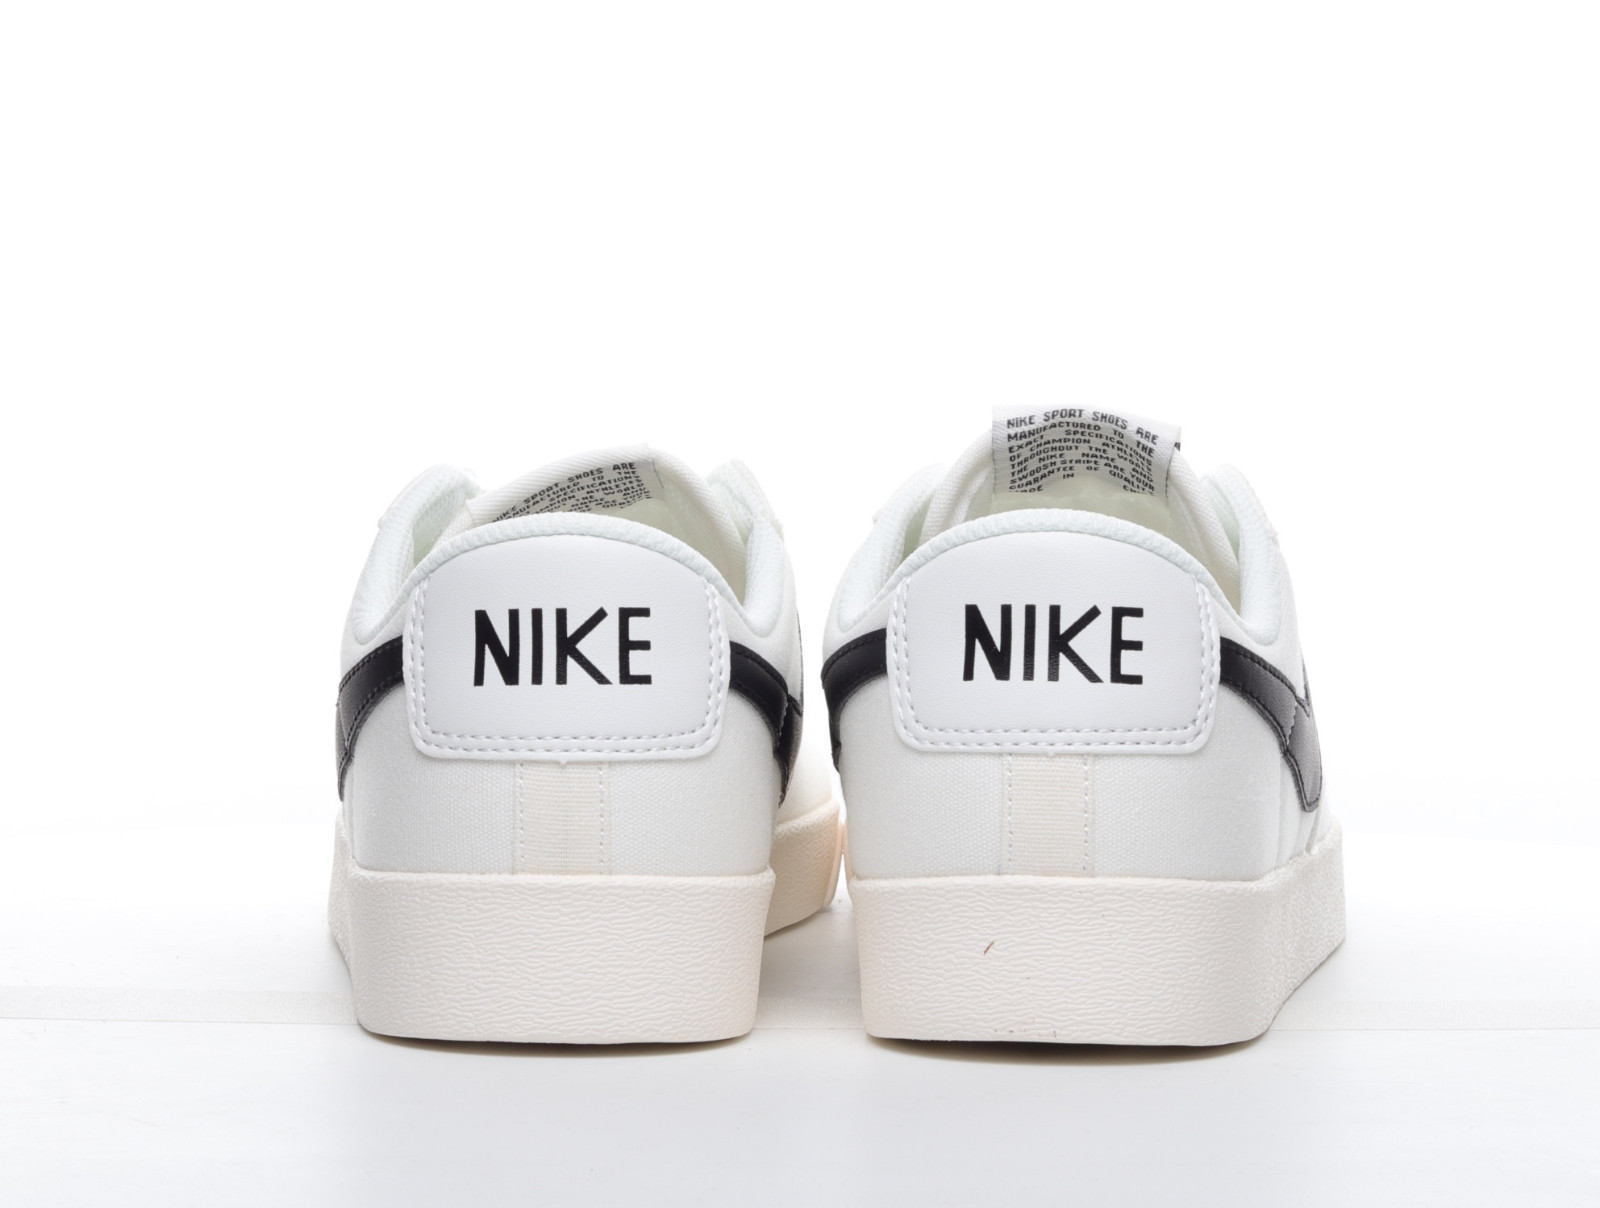 GmarShops - Nike SB Low LX White Black Casual Shoes AV9371 - cut-out suede shoes Grey 60